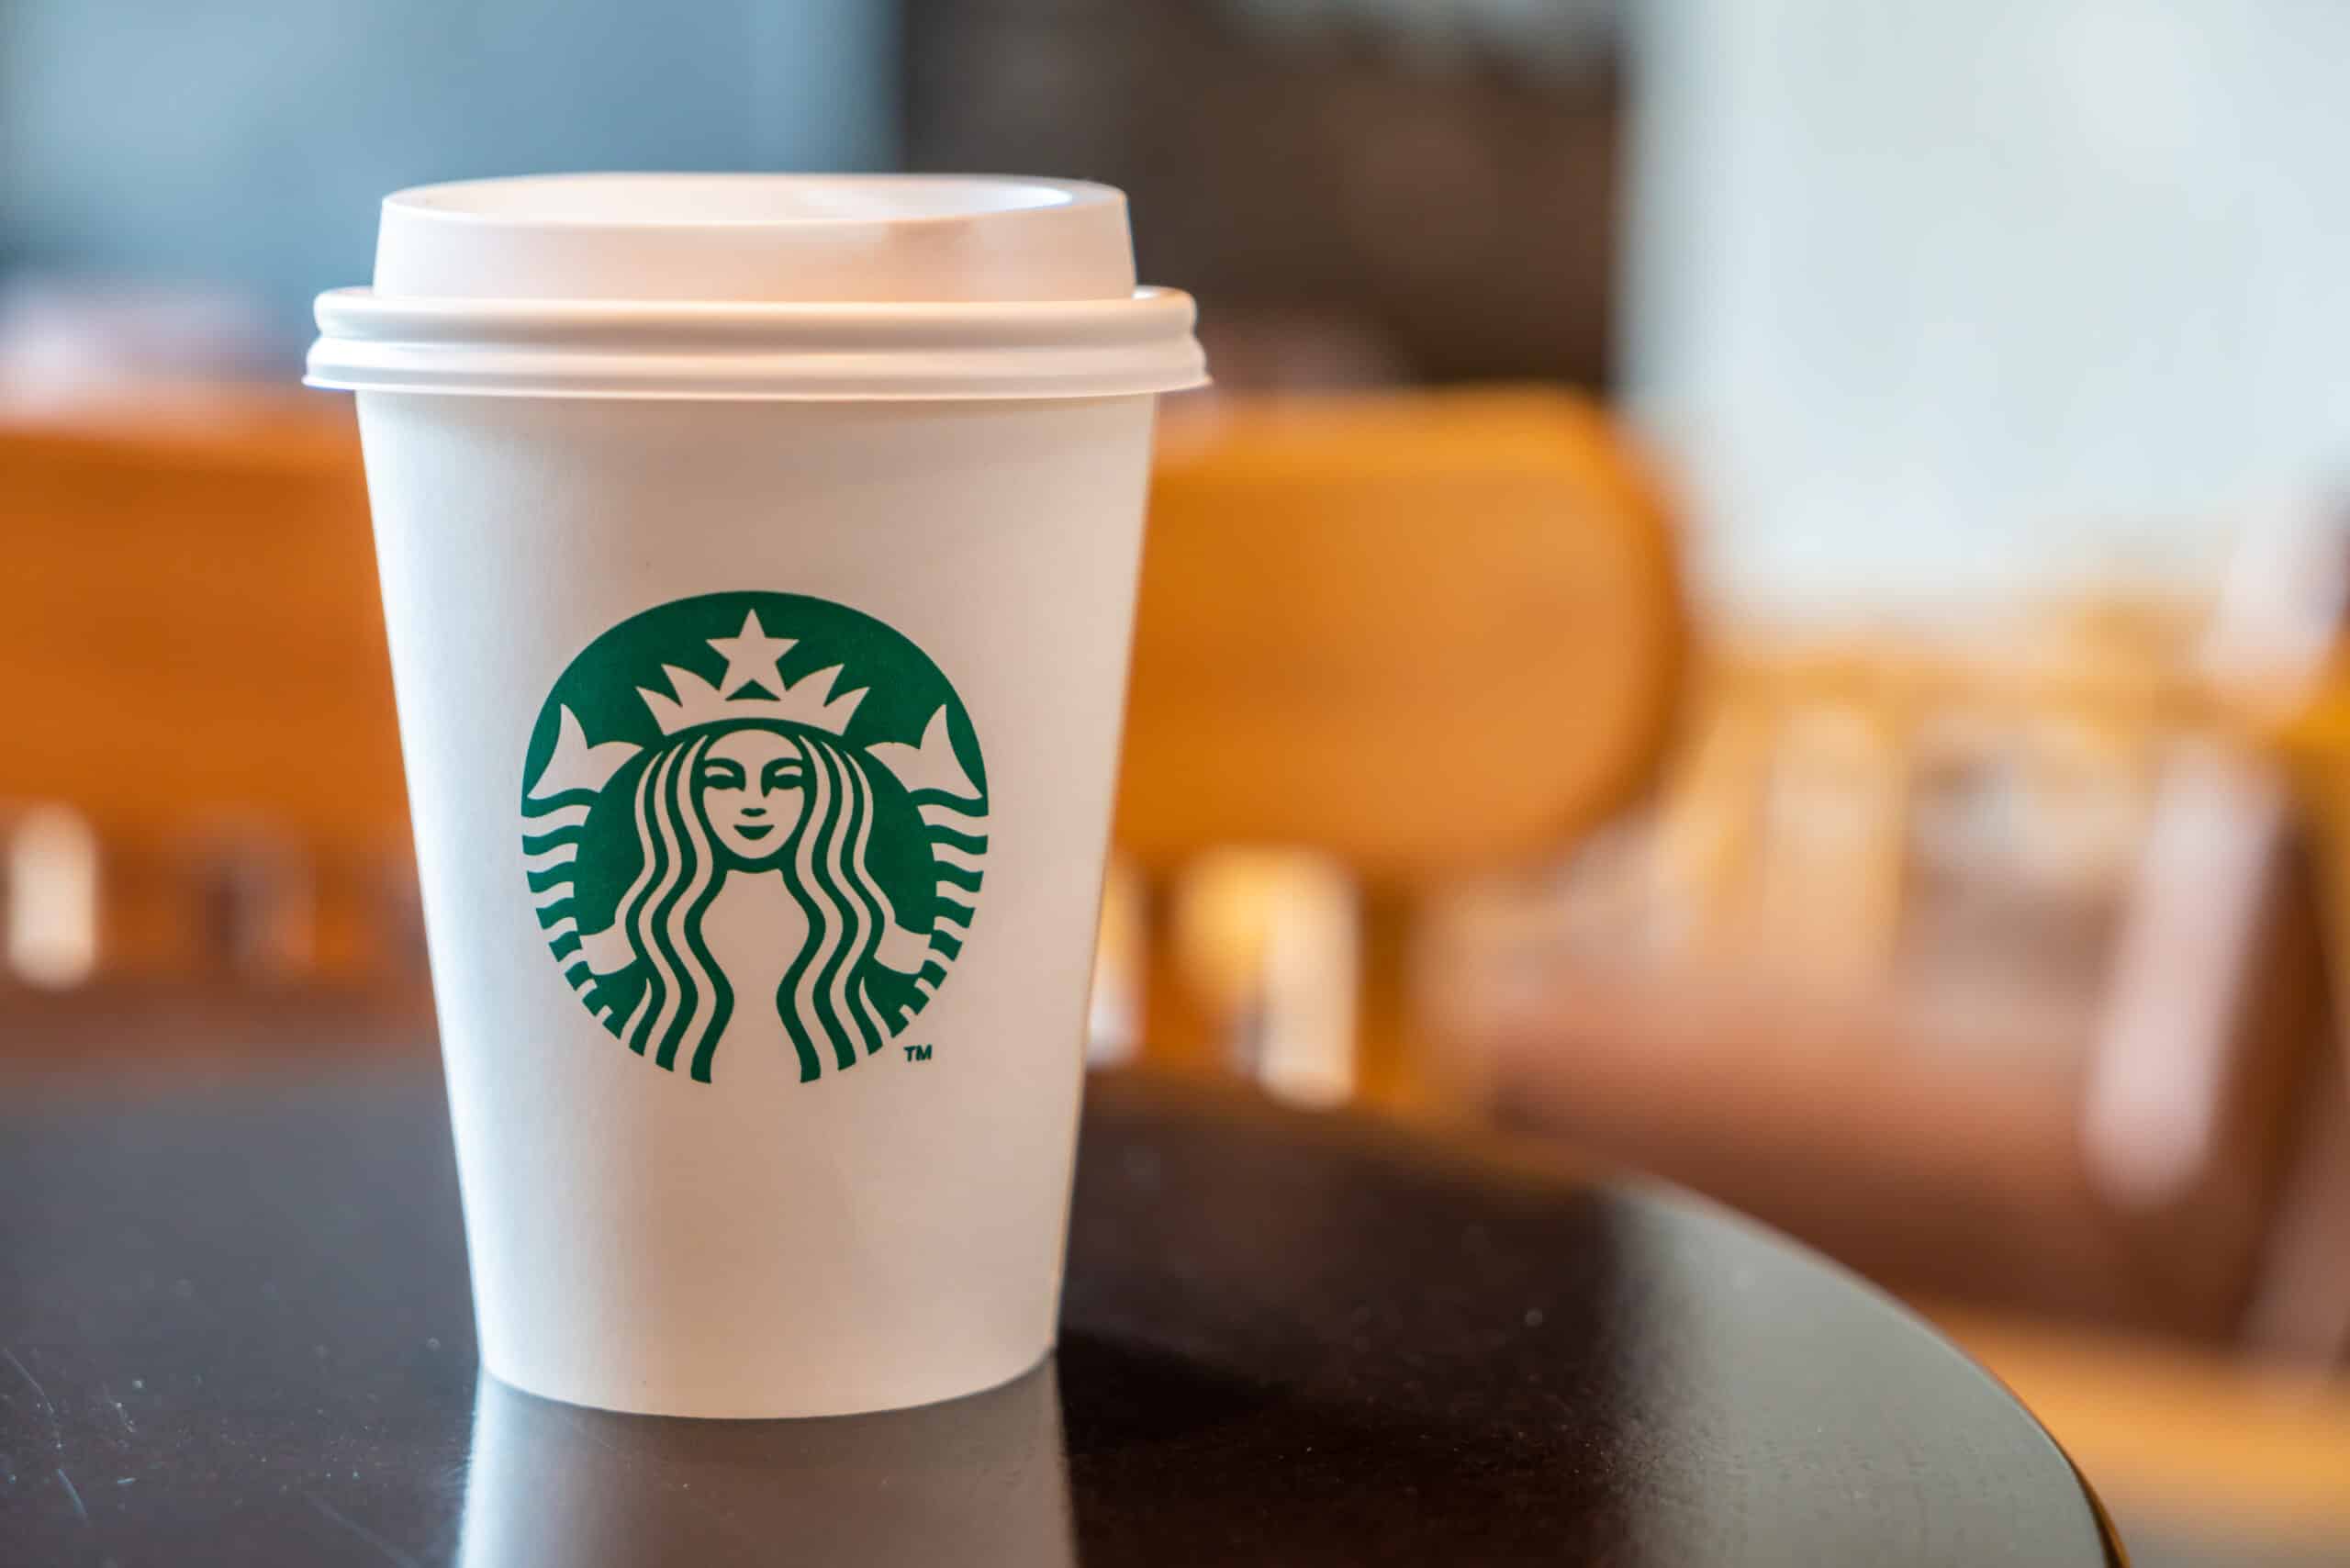 Your Guide to All the Fancy Starbucks Drinks (So You Know What You Are Ordering)